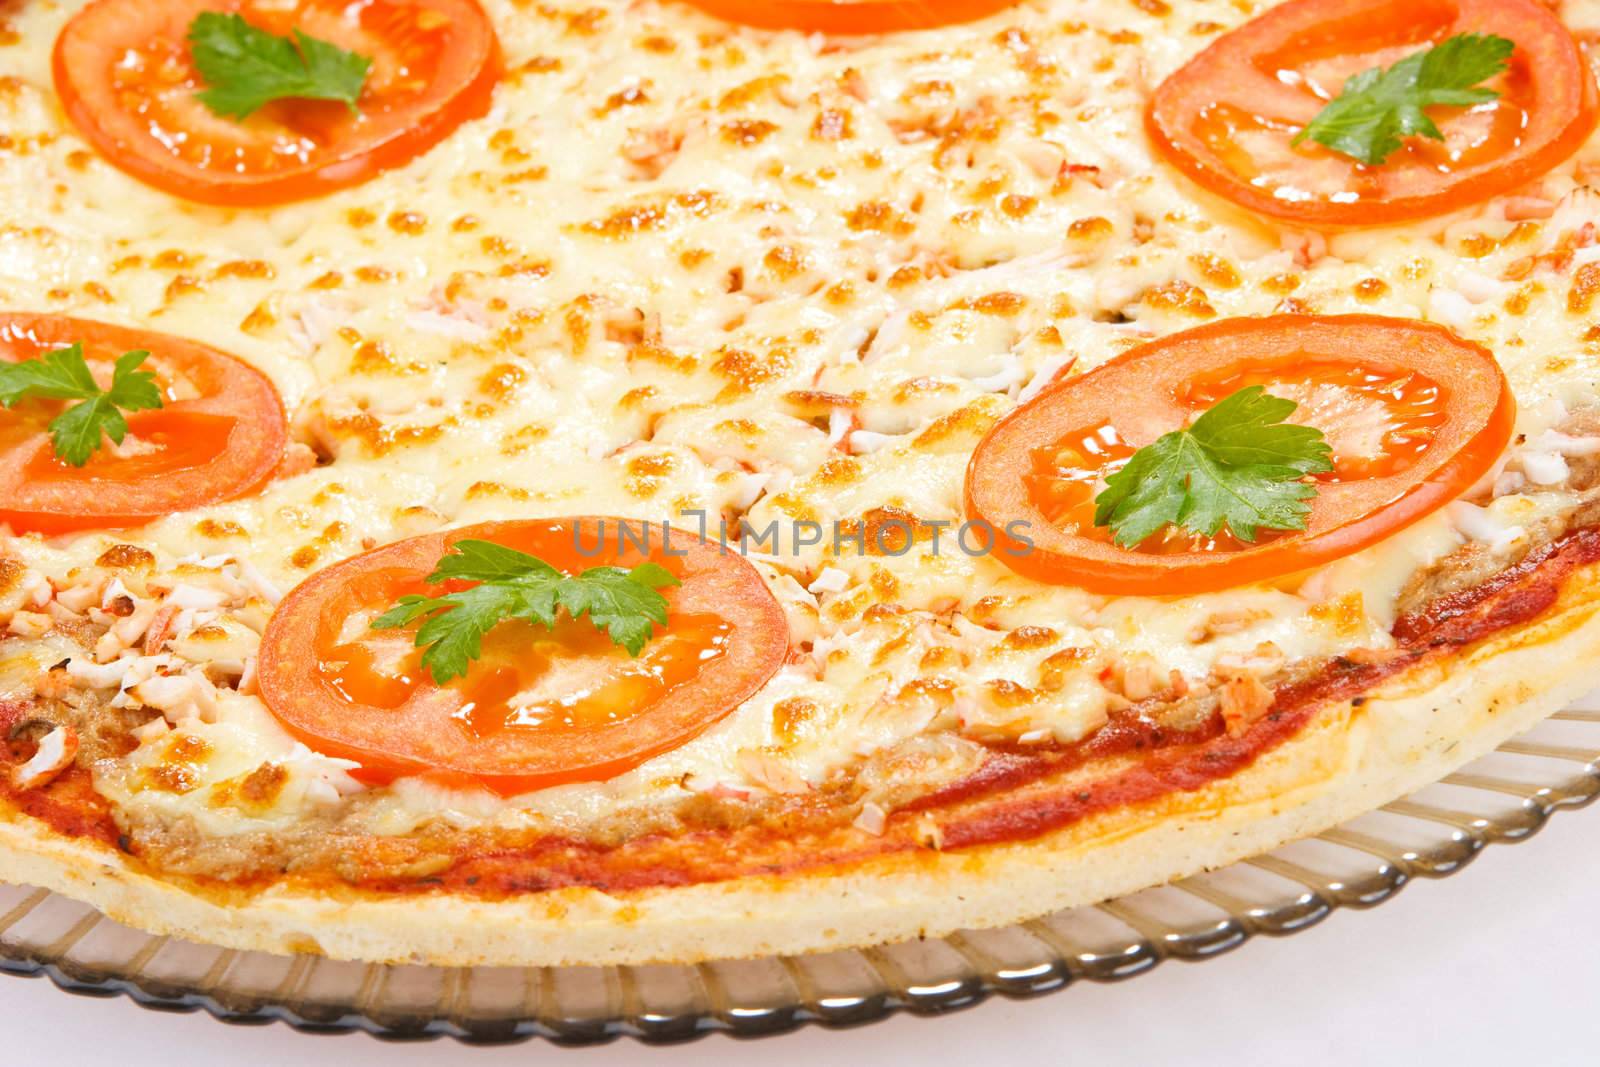 Seafood Pizza by vsurkov